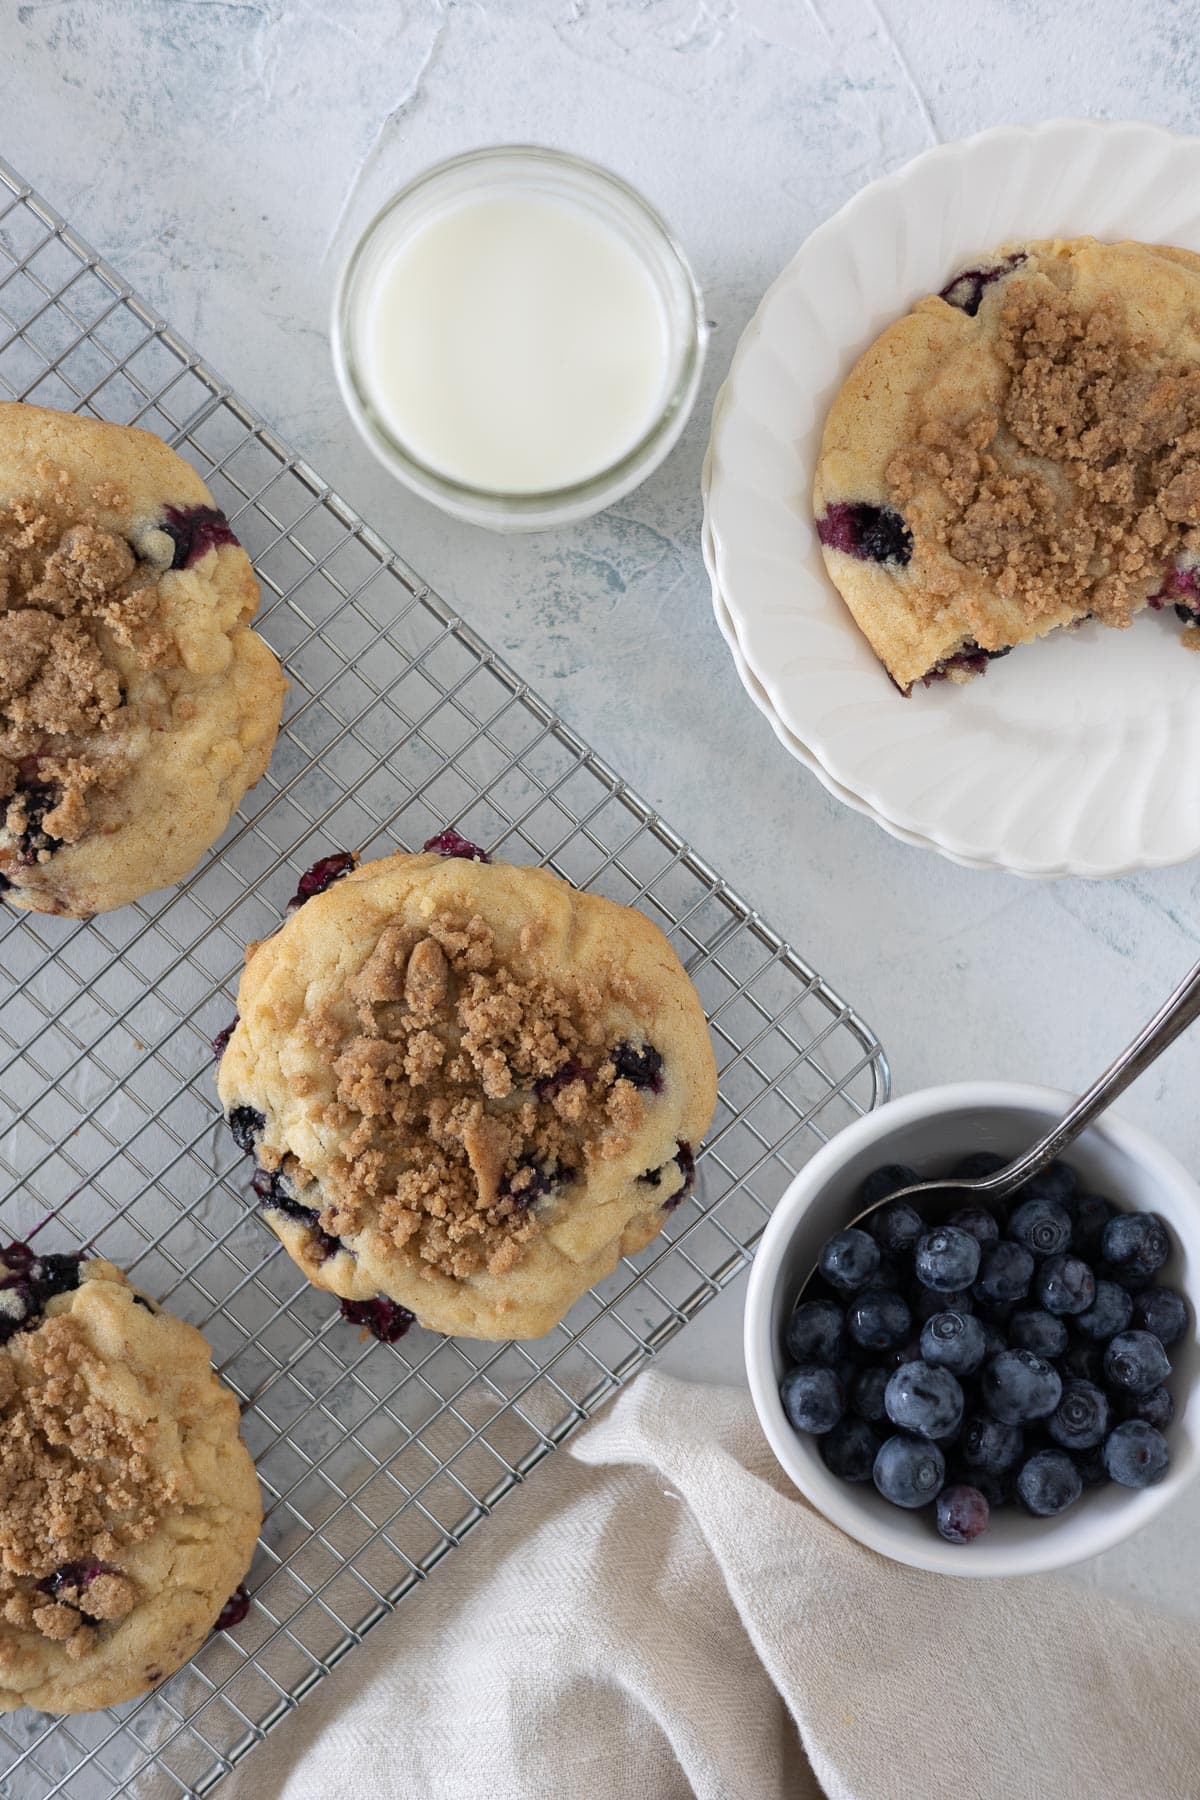 Streusel-topped blueberry cookies on a baking sheet with a small bowl of fresh blueberries.